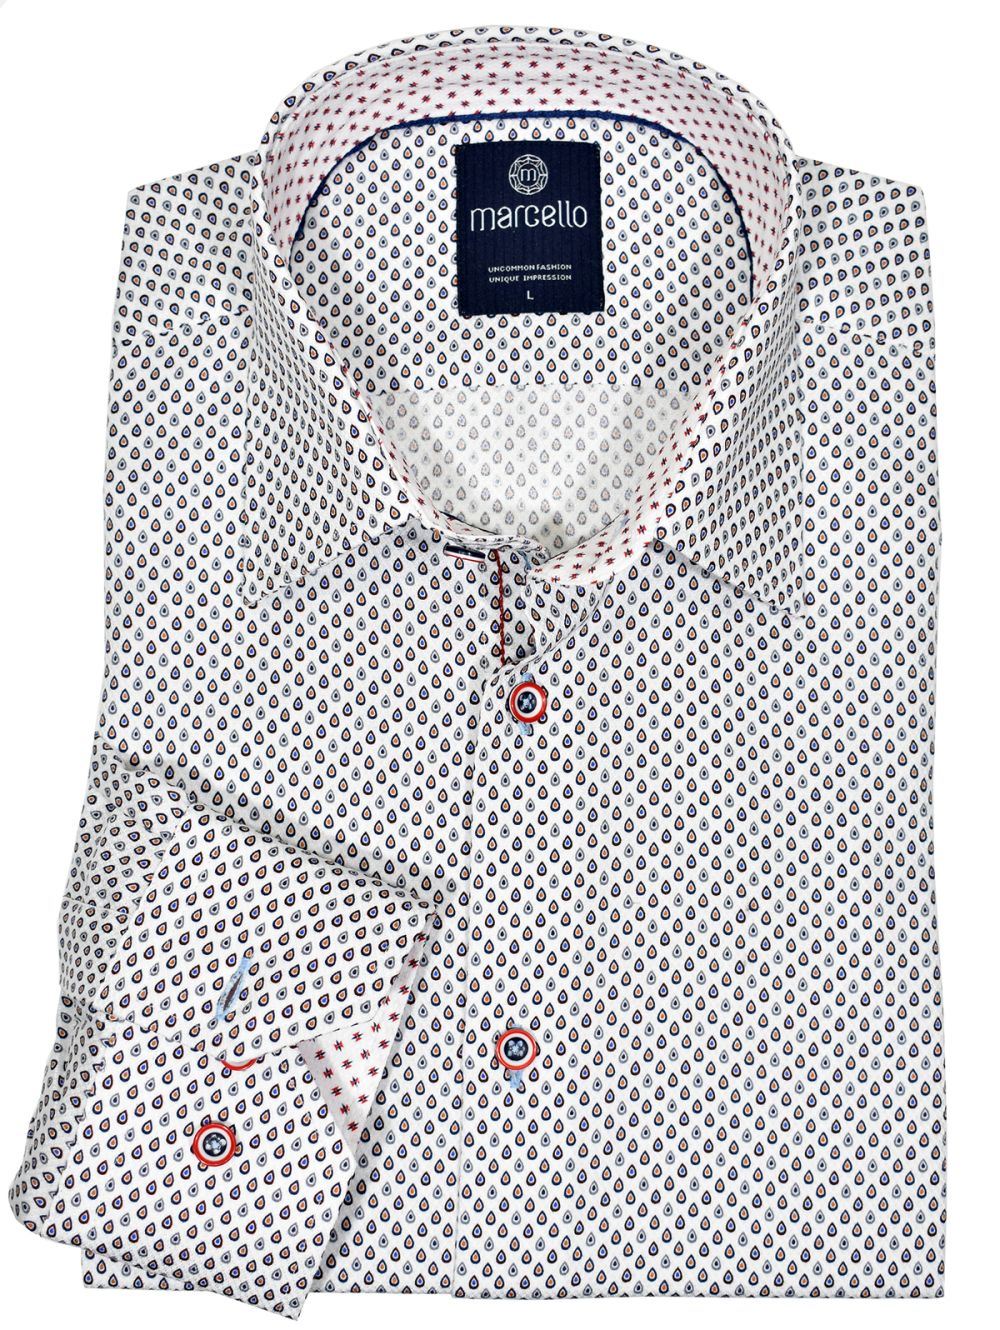 The Marcello exclusive 1 piece roll collar will look significantly better than your normal shirts. Incredible easy care, herringbone fabric feels extra fine and performs well all day.   The cotton fabric with microfiber has a clean teardrop pattern in easy complimentary colors.   Hand selected buttons, contrast stitch detailing and a medium collar. Second cuff placket button for the perfect cuff turn up.  Classic shaped fit, best for a medium build.